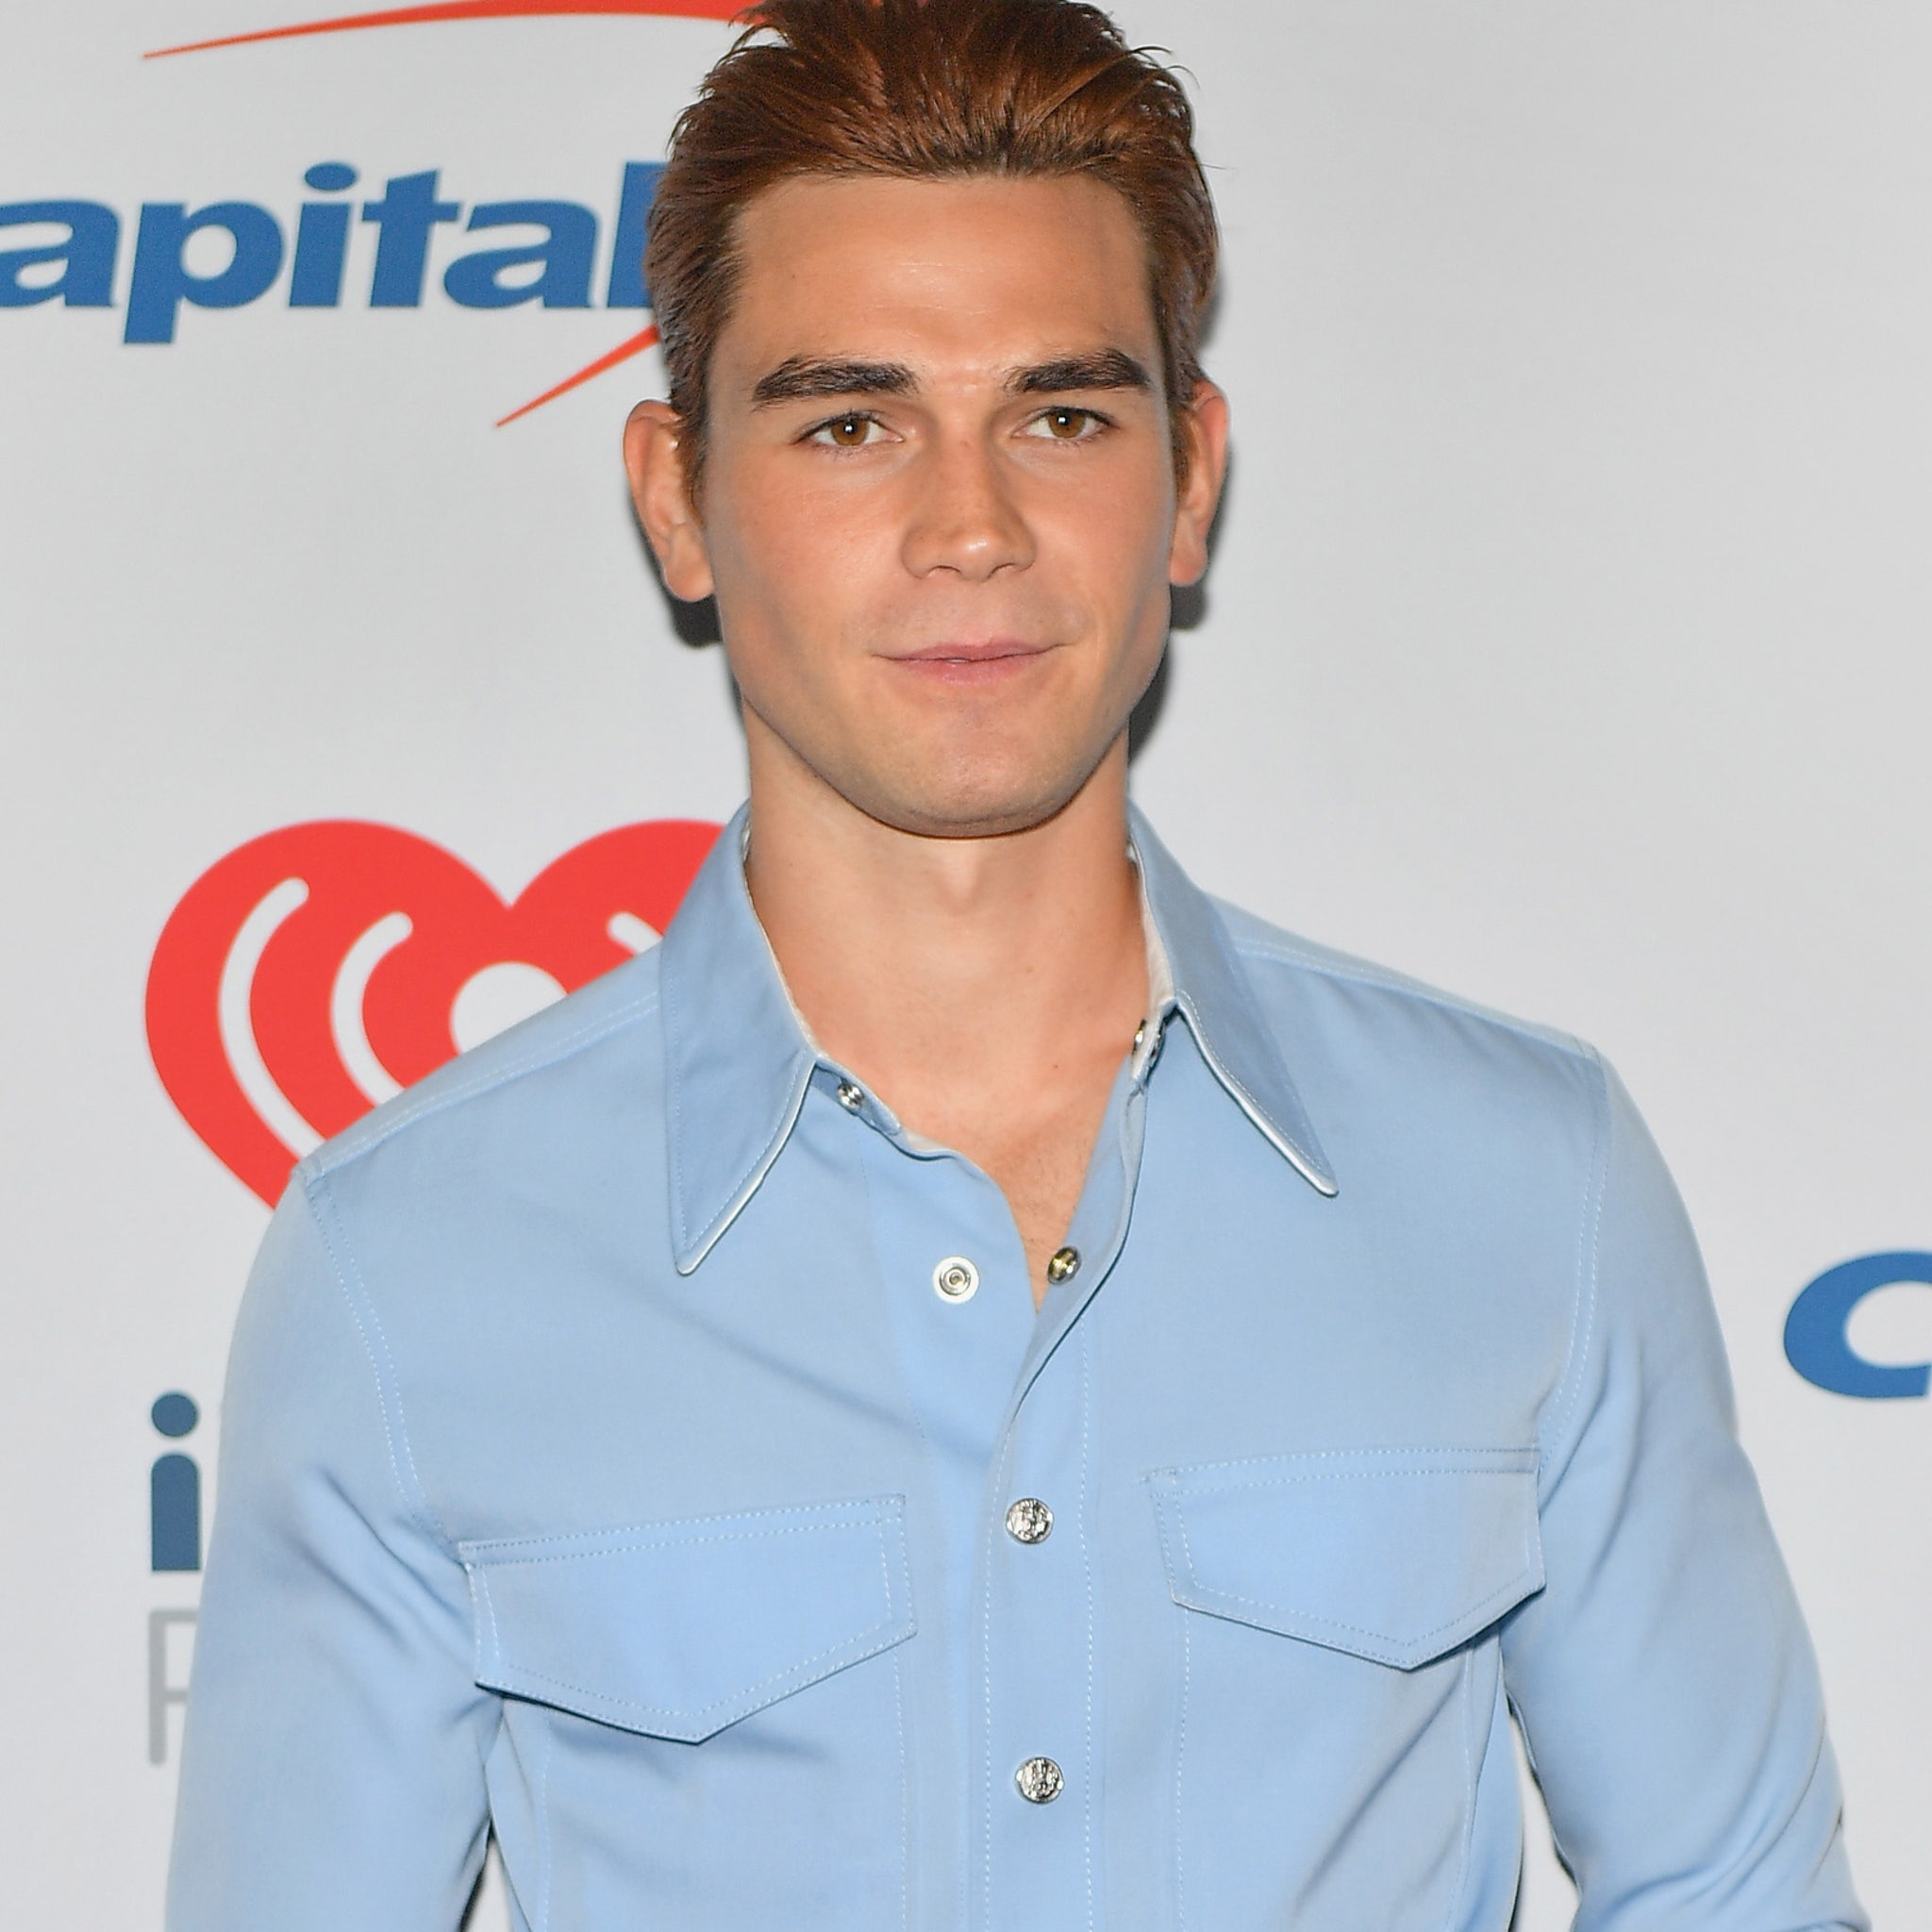 Kj Apa Responds To Criticism Over Being So Silent On Black Lives Matter Movement